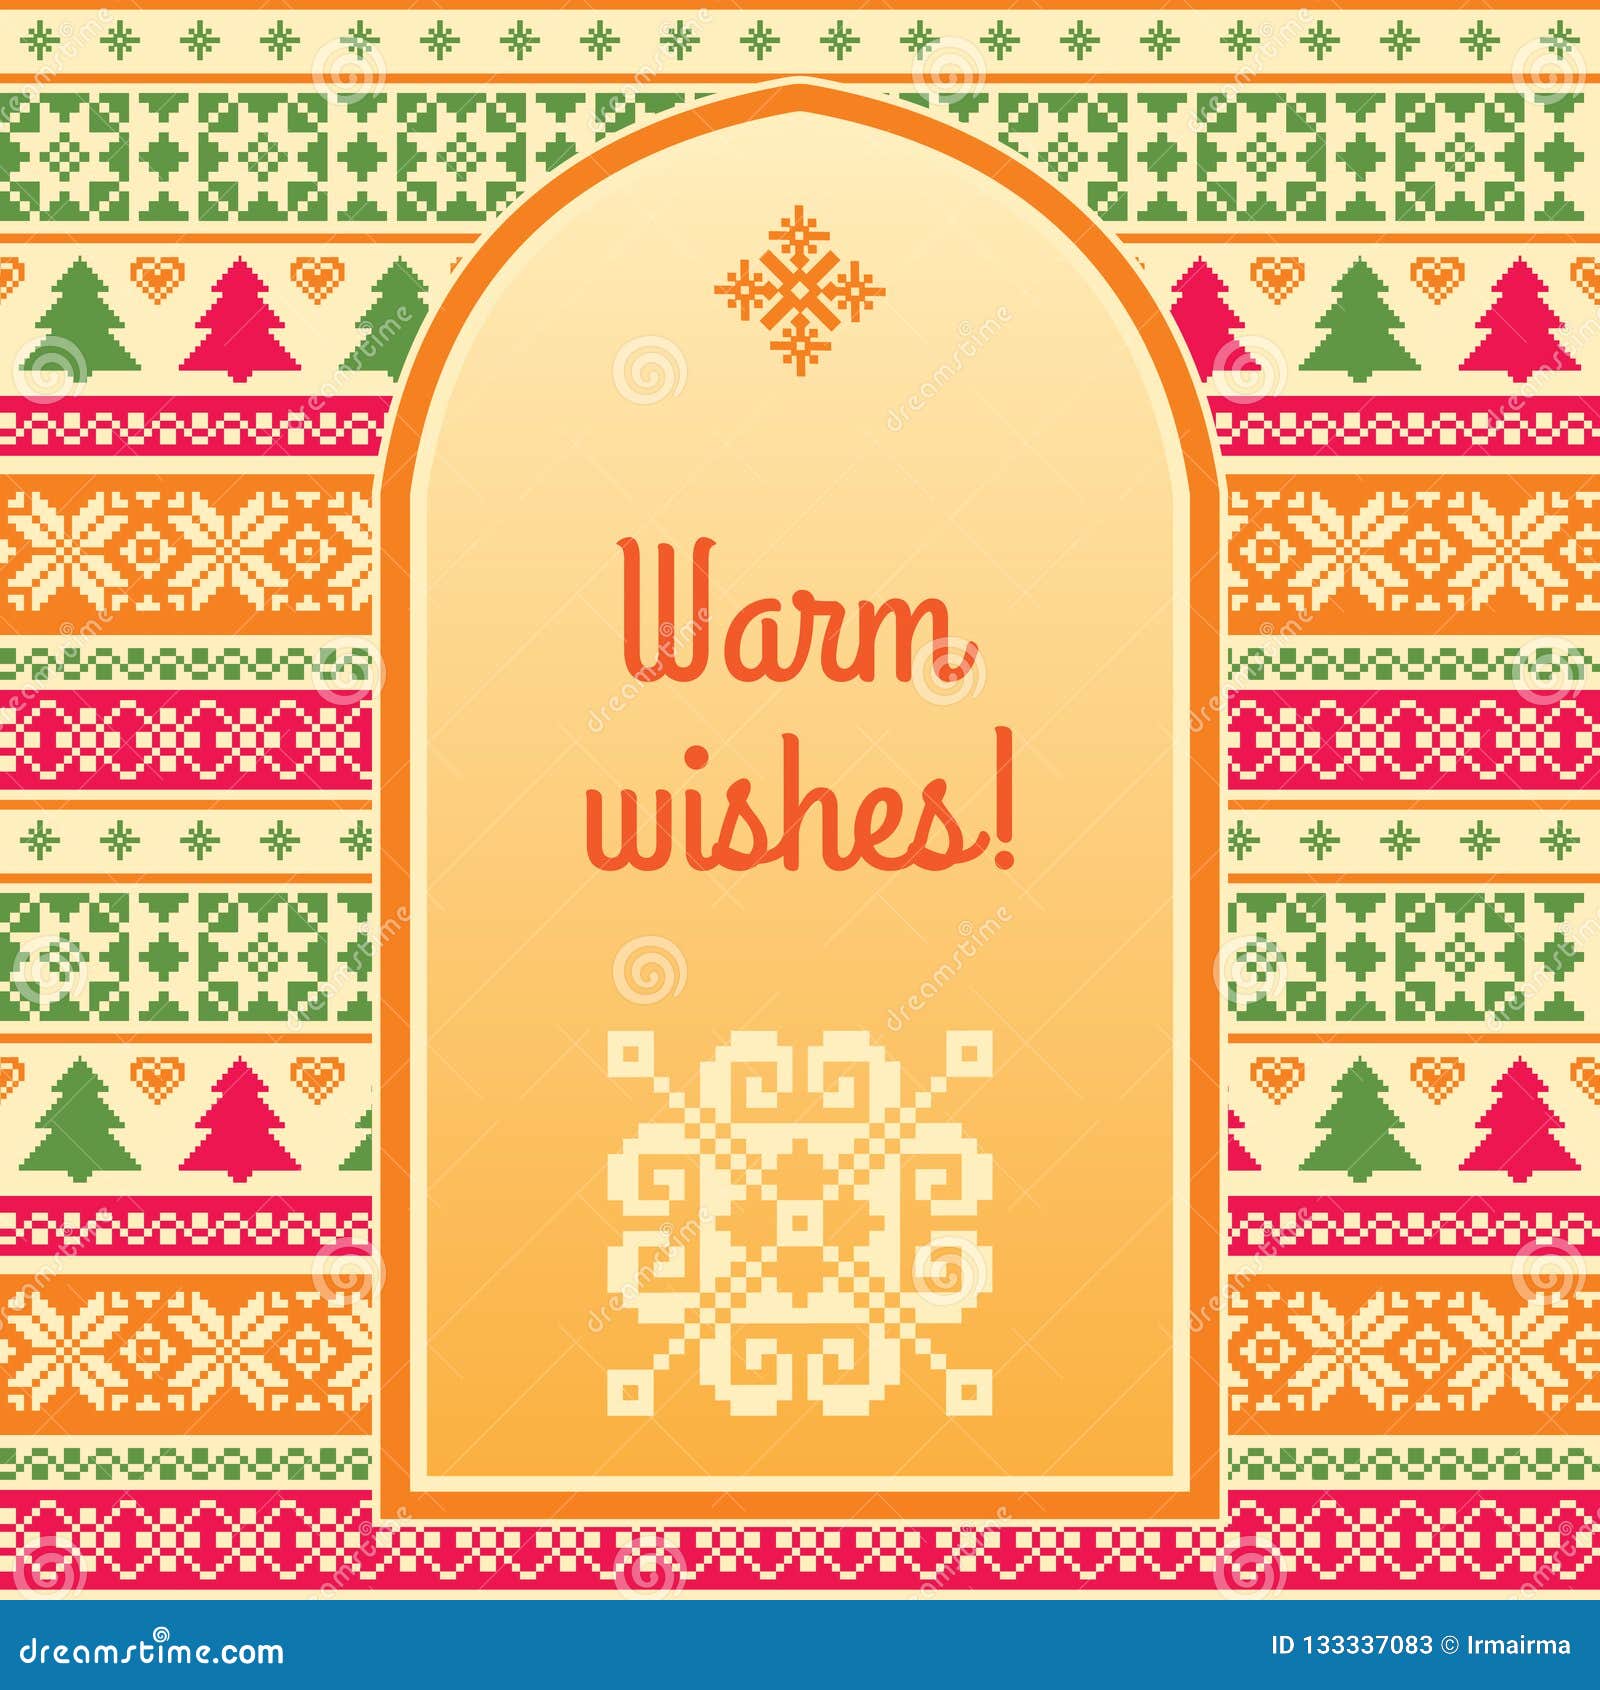 Warm Wishes Christmas Background Stock Vector - Illustration of banner ...